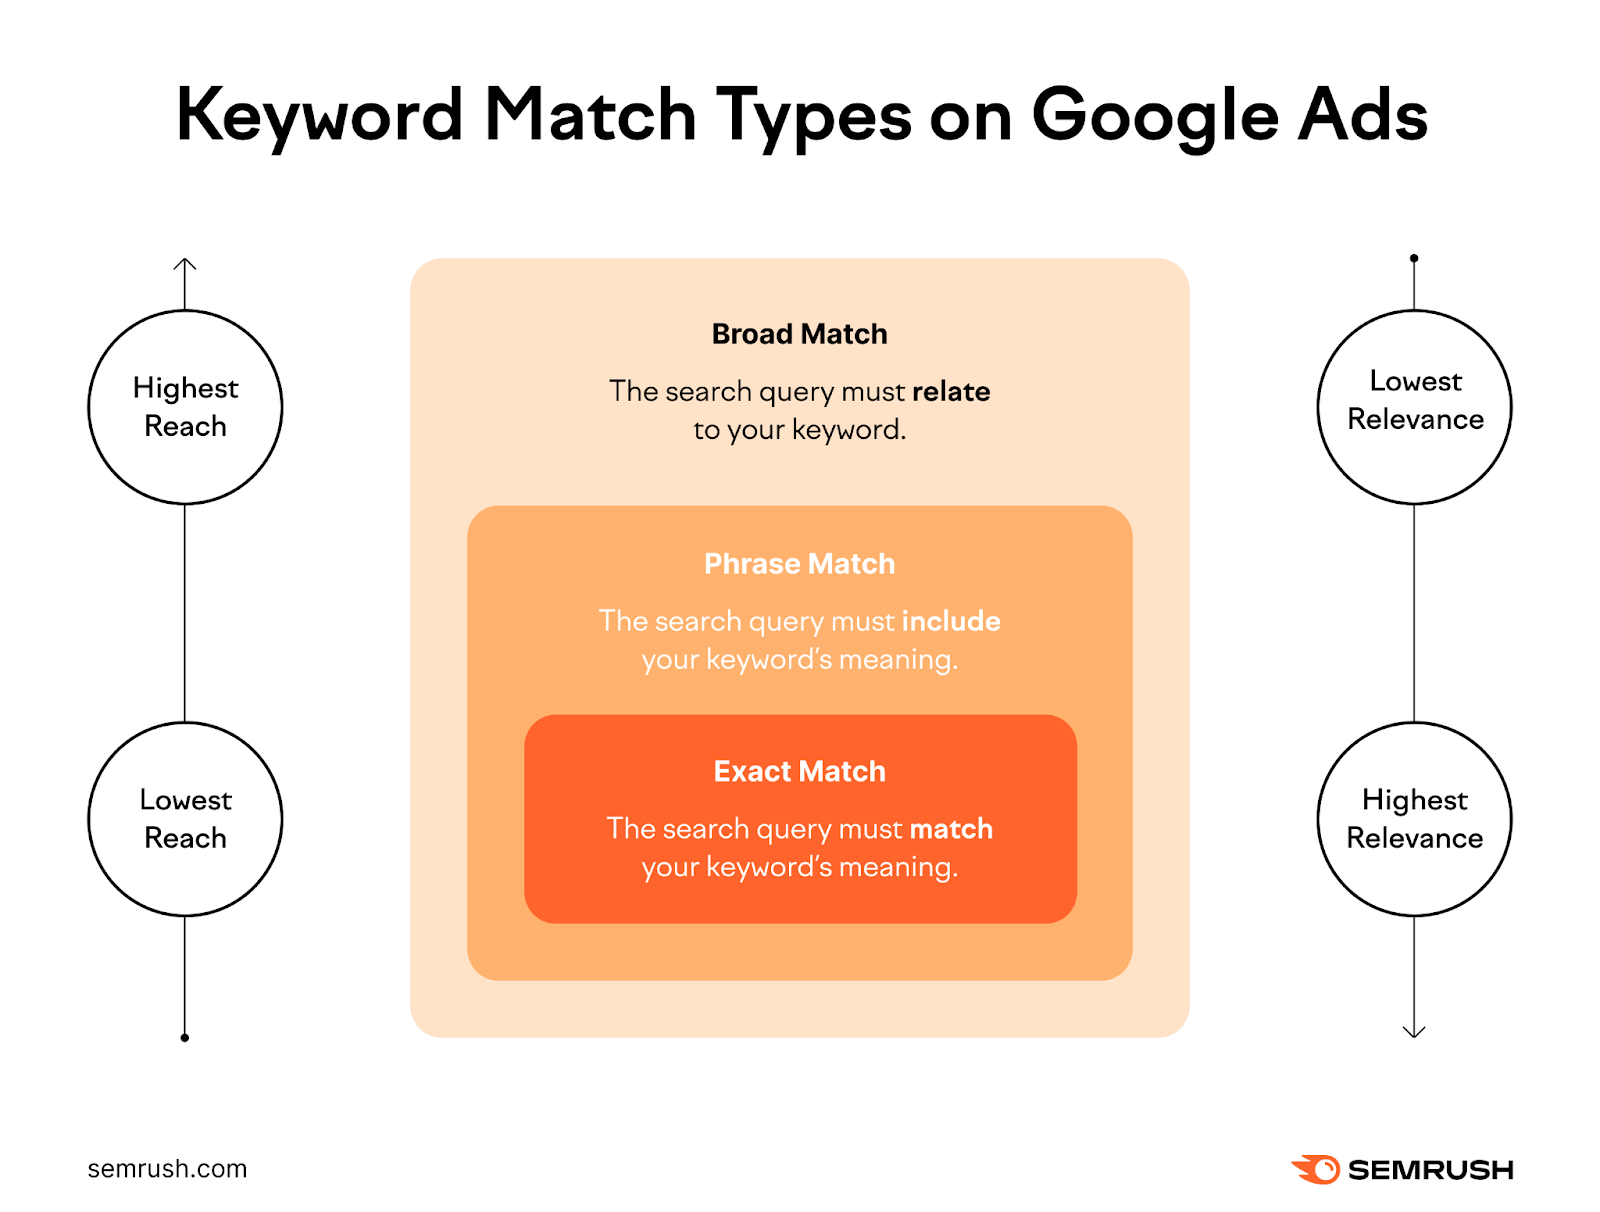 Keyword match types on Google Ads from highest to lowest reach and lowest relevance to highest relevance: Broad Match, Phrase Match, and Exact Match.